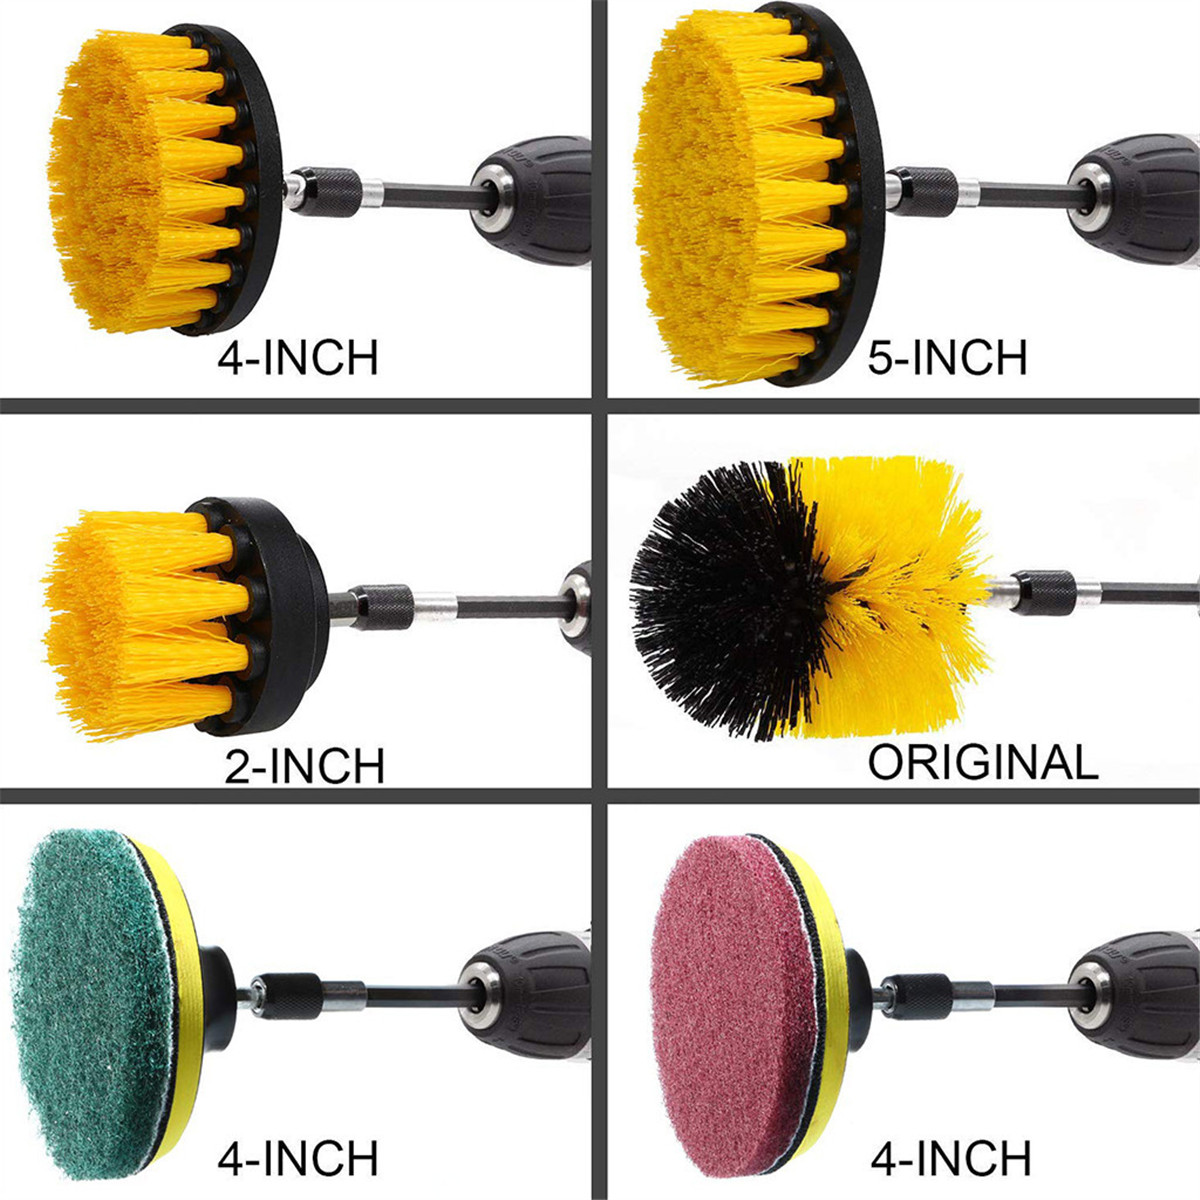 12Pcs-Drill-Brush-Set-Tub-Cleaner-Grout-Power-Scrubber-Cleaning-Attachments-Kit-1780037-2